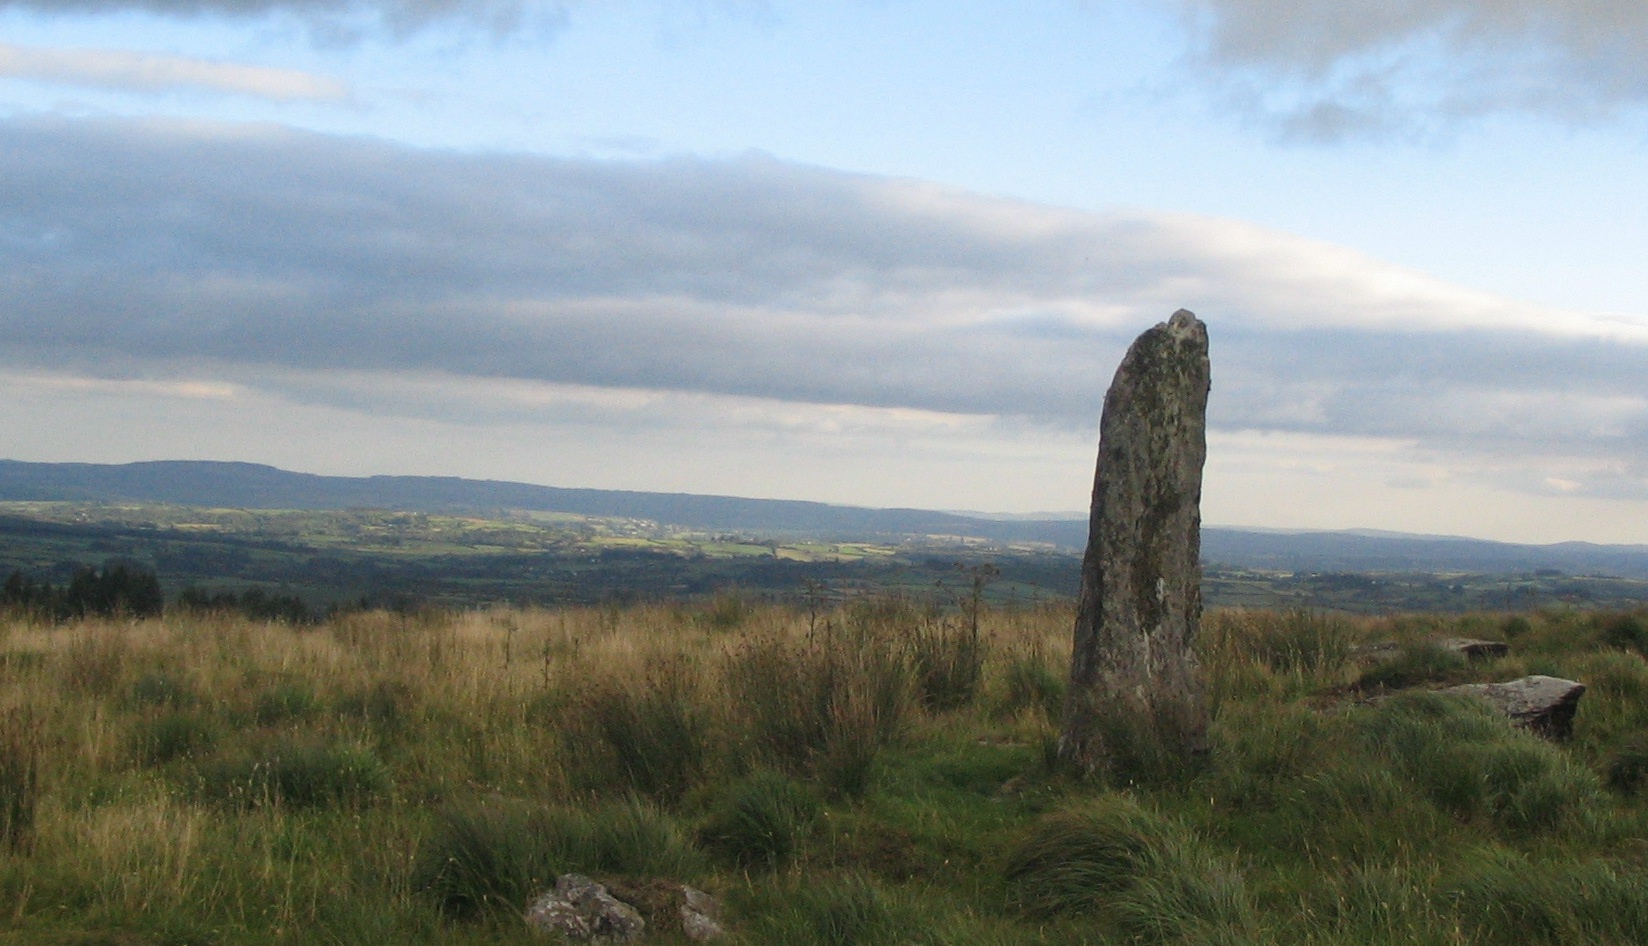 Unidentified standing stone located between Millstreet and Ballinagree, Co Cork, Ireland (public domain)